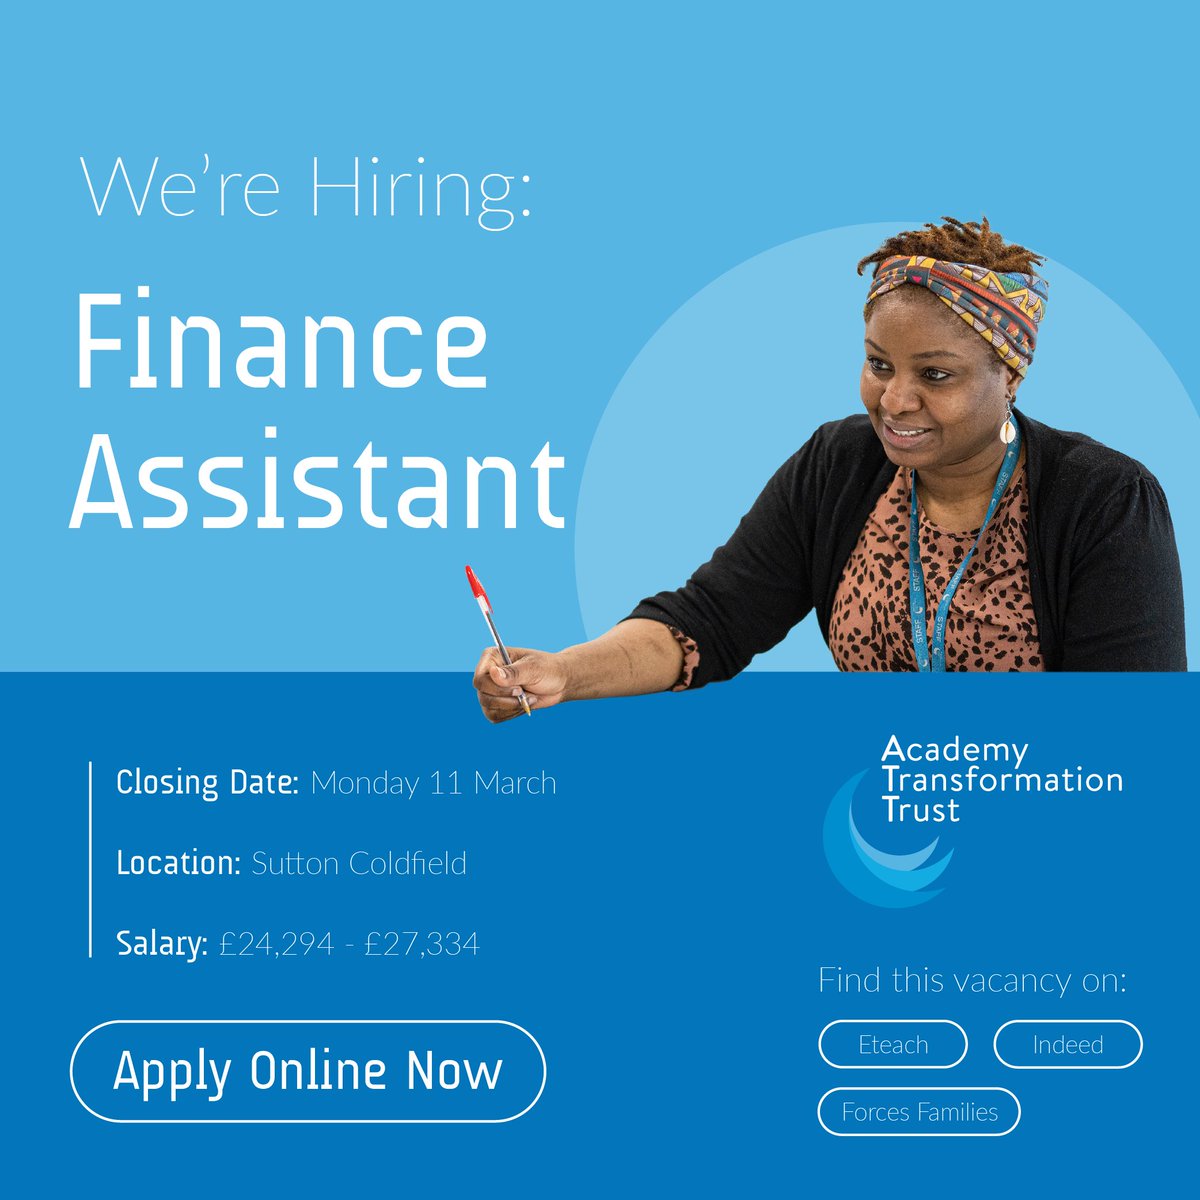 Looking for a new job in a supportive and friendly team? We're looking for a finance assistant to join our head office in Sutton Coldfield 👇 Find out more and apply: uk.indeed.com/cmp/Academy-Tr… #financejobs #westmidlandsjobs #birminghamjobs #edujobs #hiring #workwithus